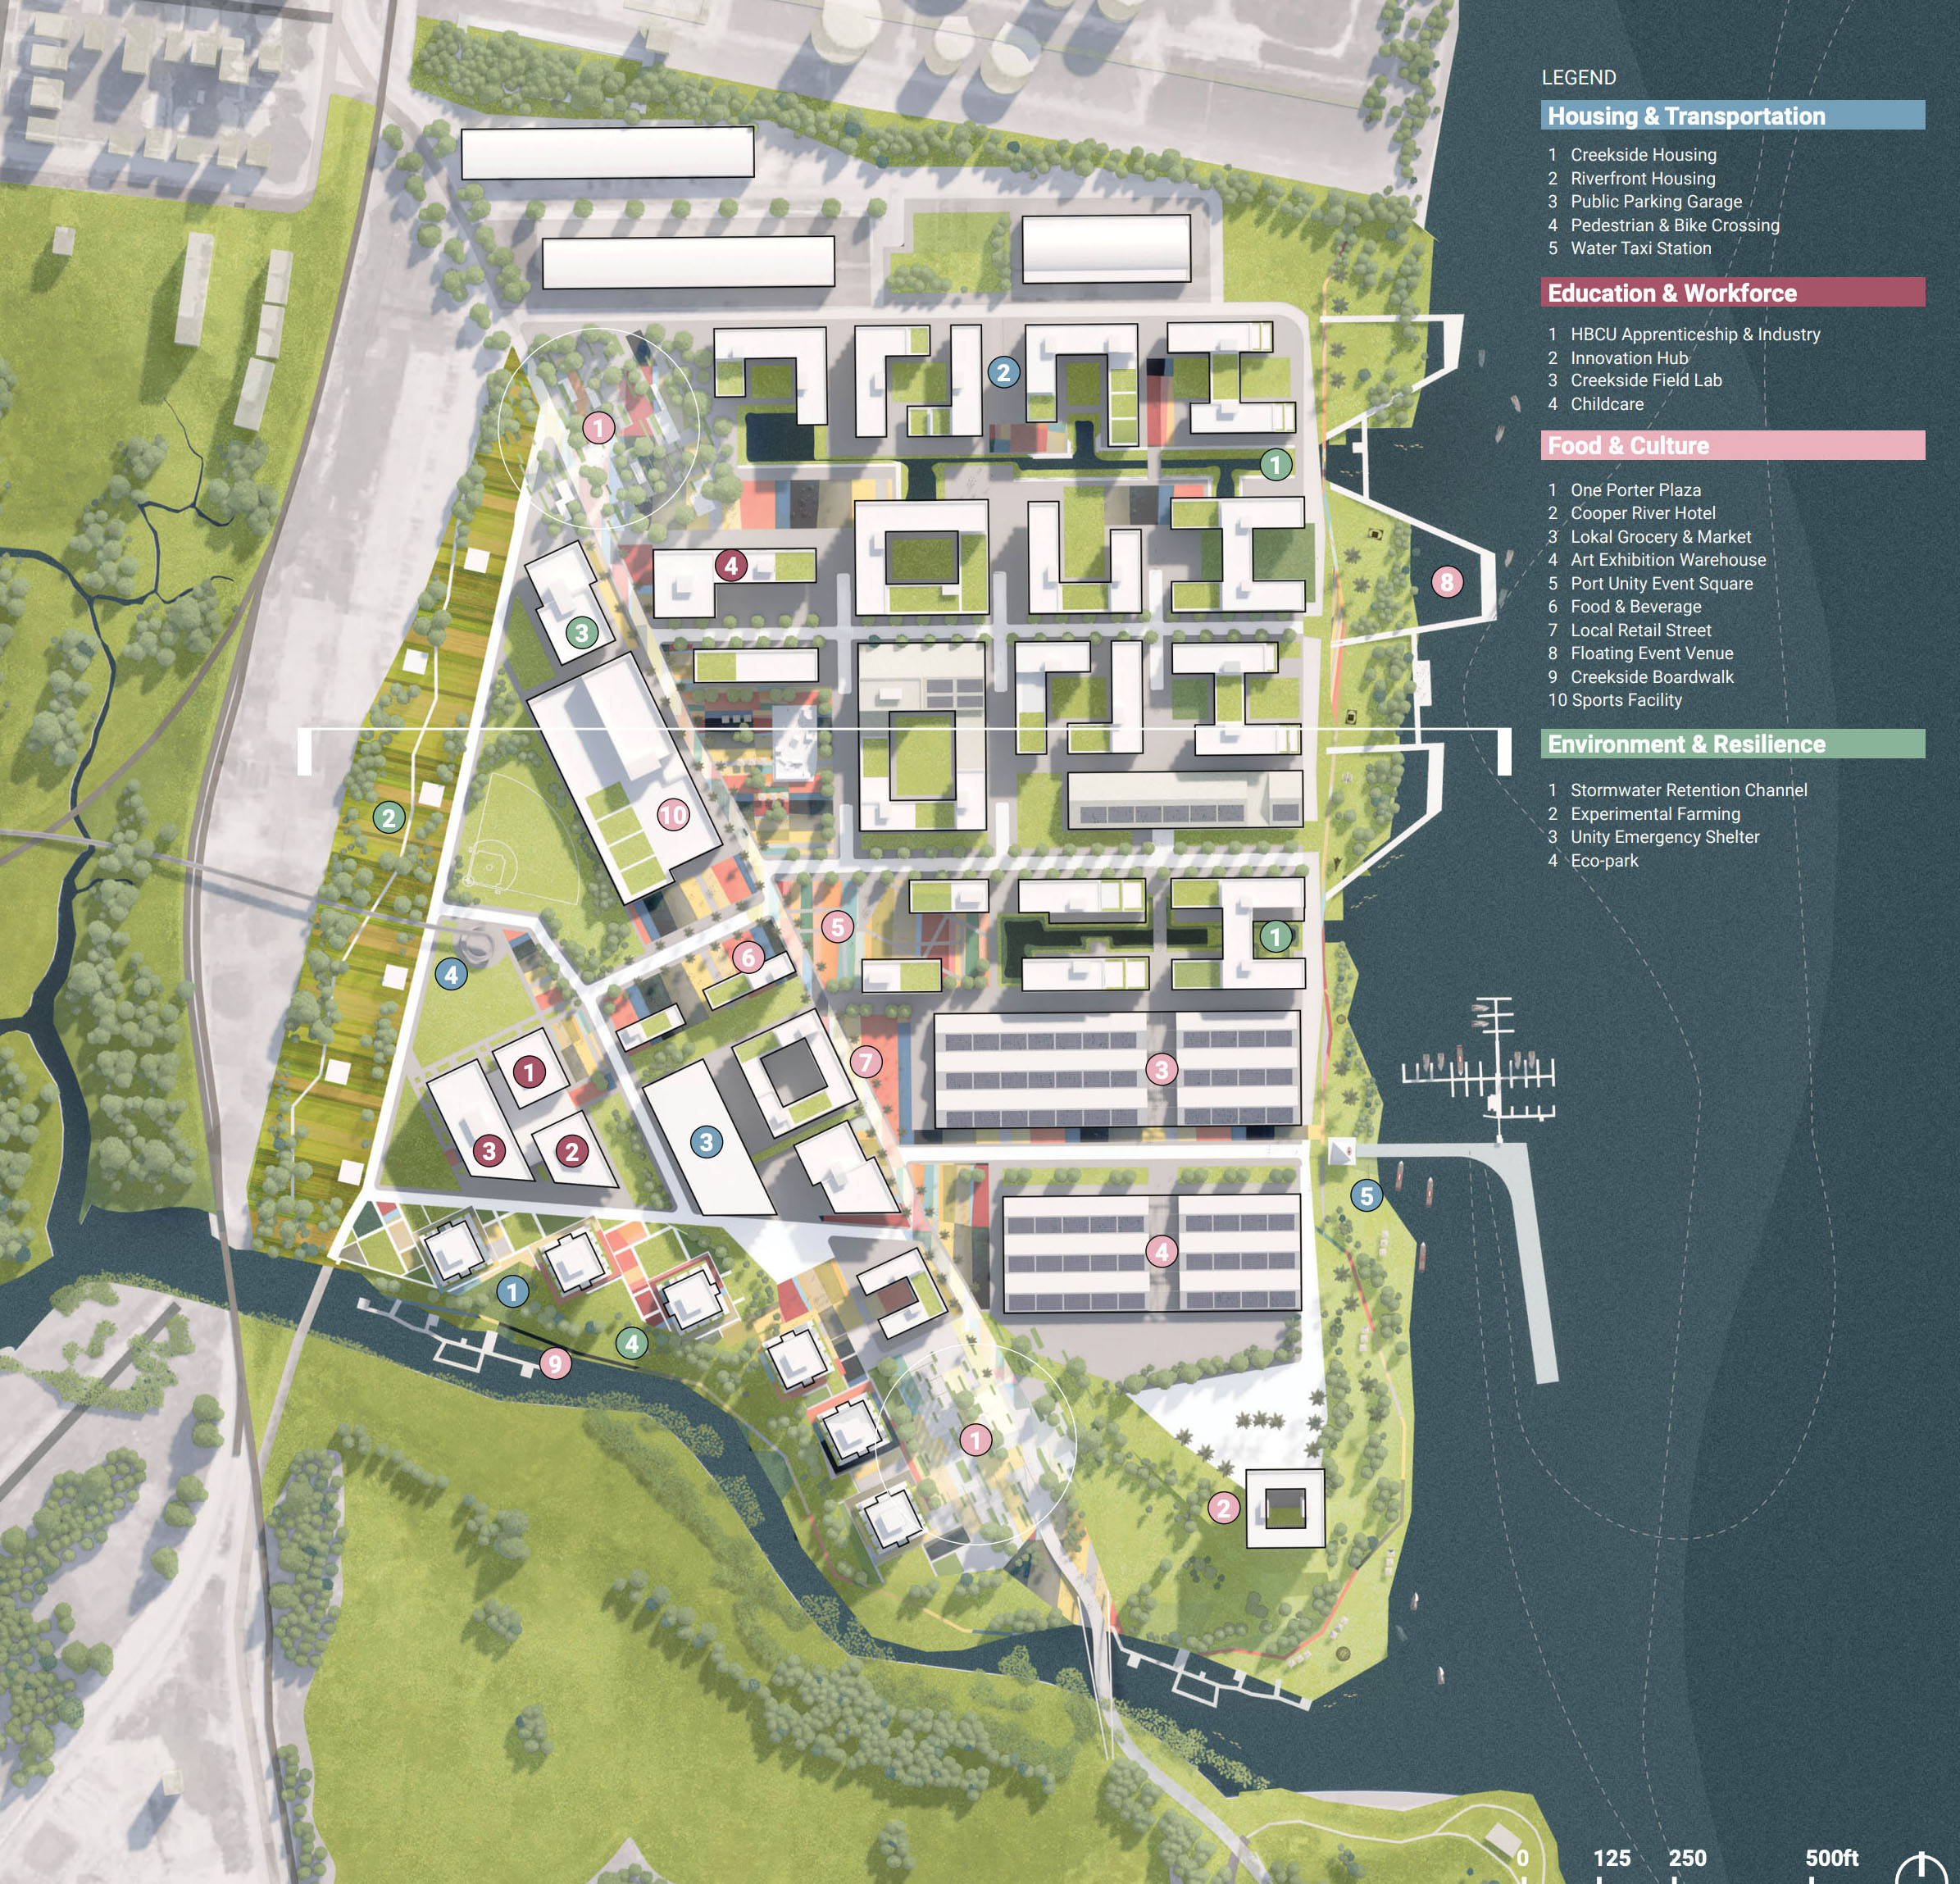 A proposed site plan and street view (top) for the “Port Unity” concept